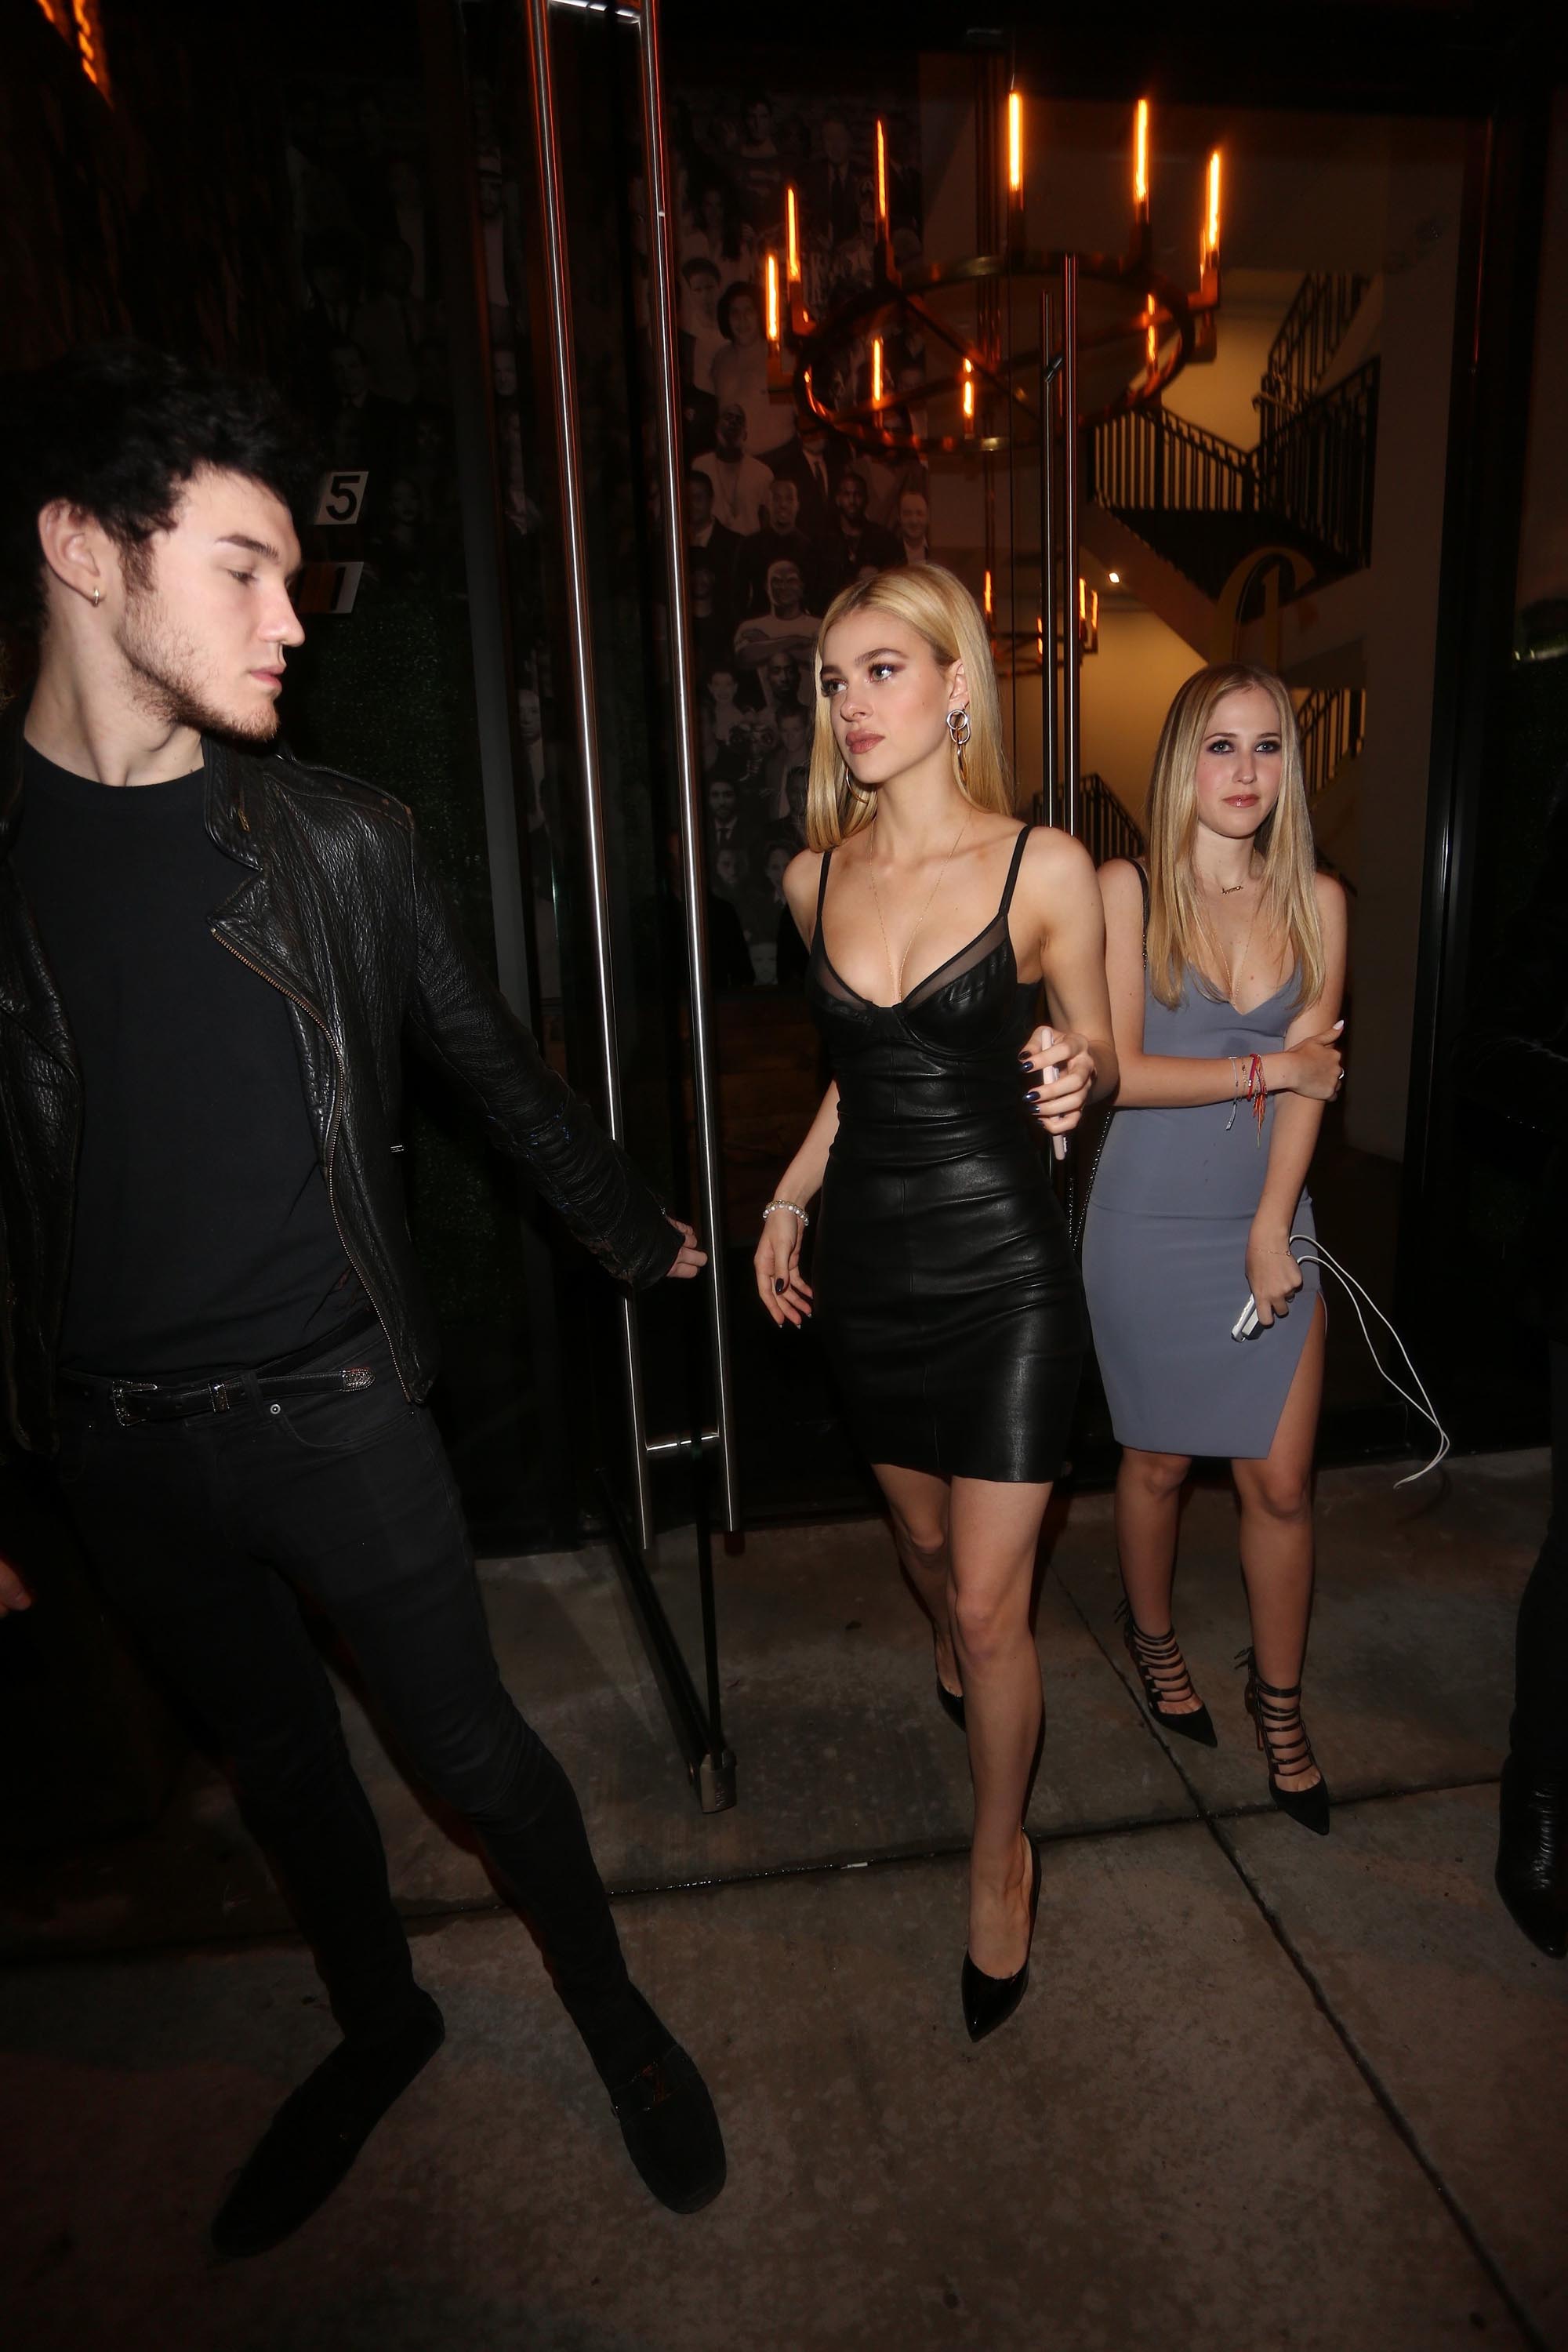 Nicola Peltz enjoyed a night out with friends at Catch LA